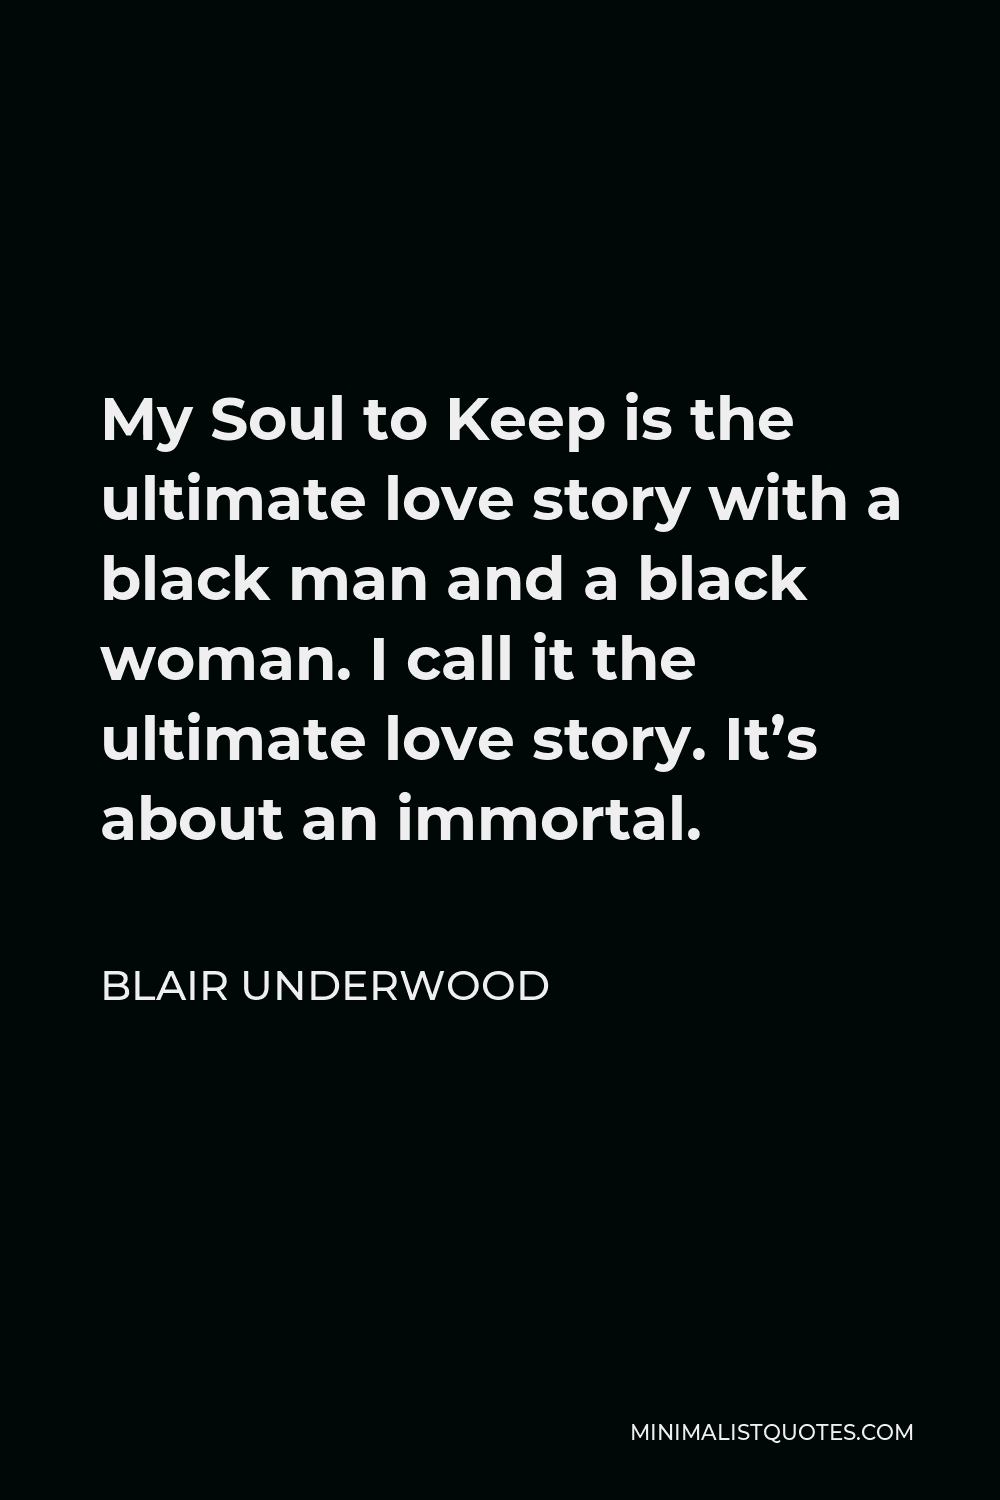 Blair Underwood Quote - My Soul to Keep is the ultimate love story with a black man and a black woman. I call it the ultimate love story. It’s about an immortal.